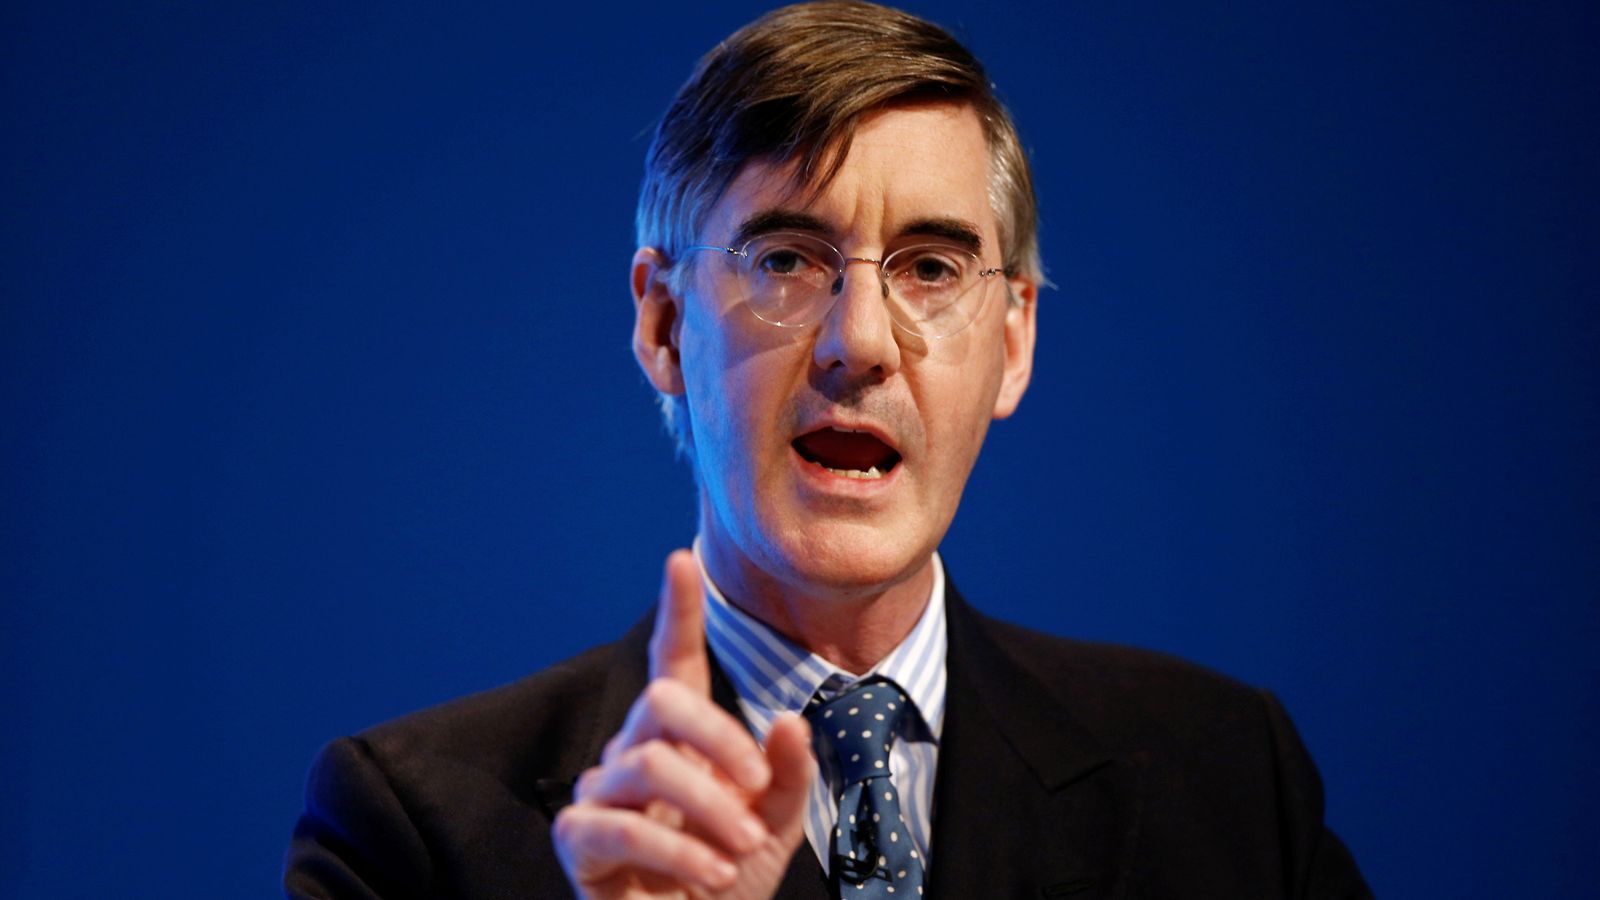 Jacob Rees-Mogg says people are getting 'snowflaky' about bullying allegations levelled at government ministers